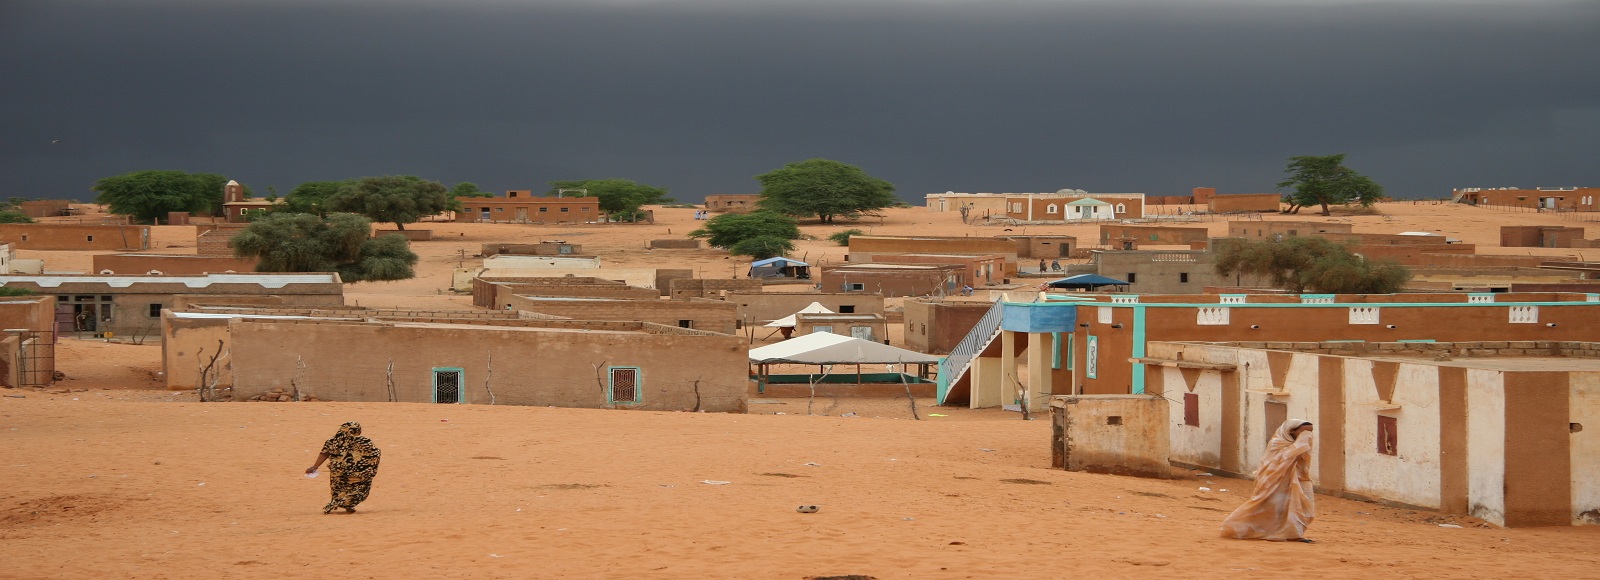 Transfer Offers in Mauritania. Low Cost Transfers in  Mauritania 